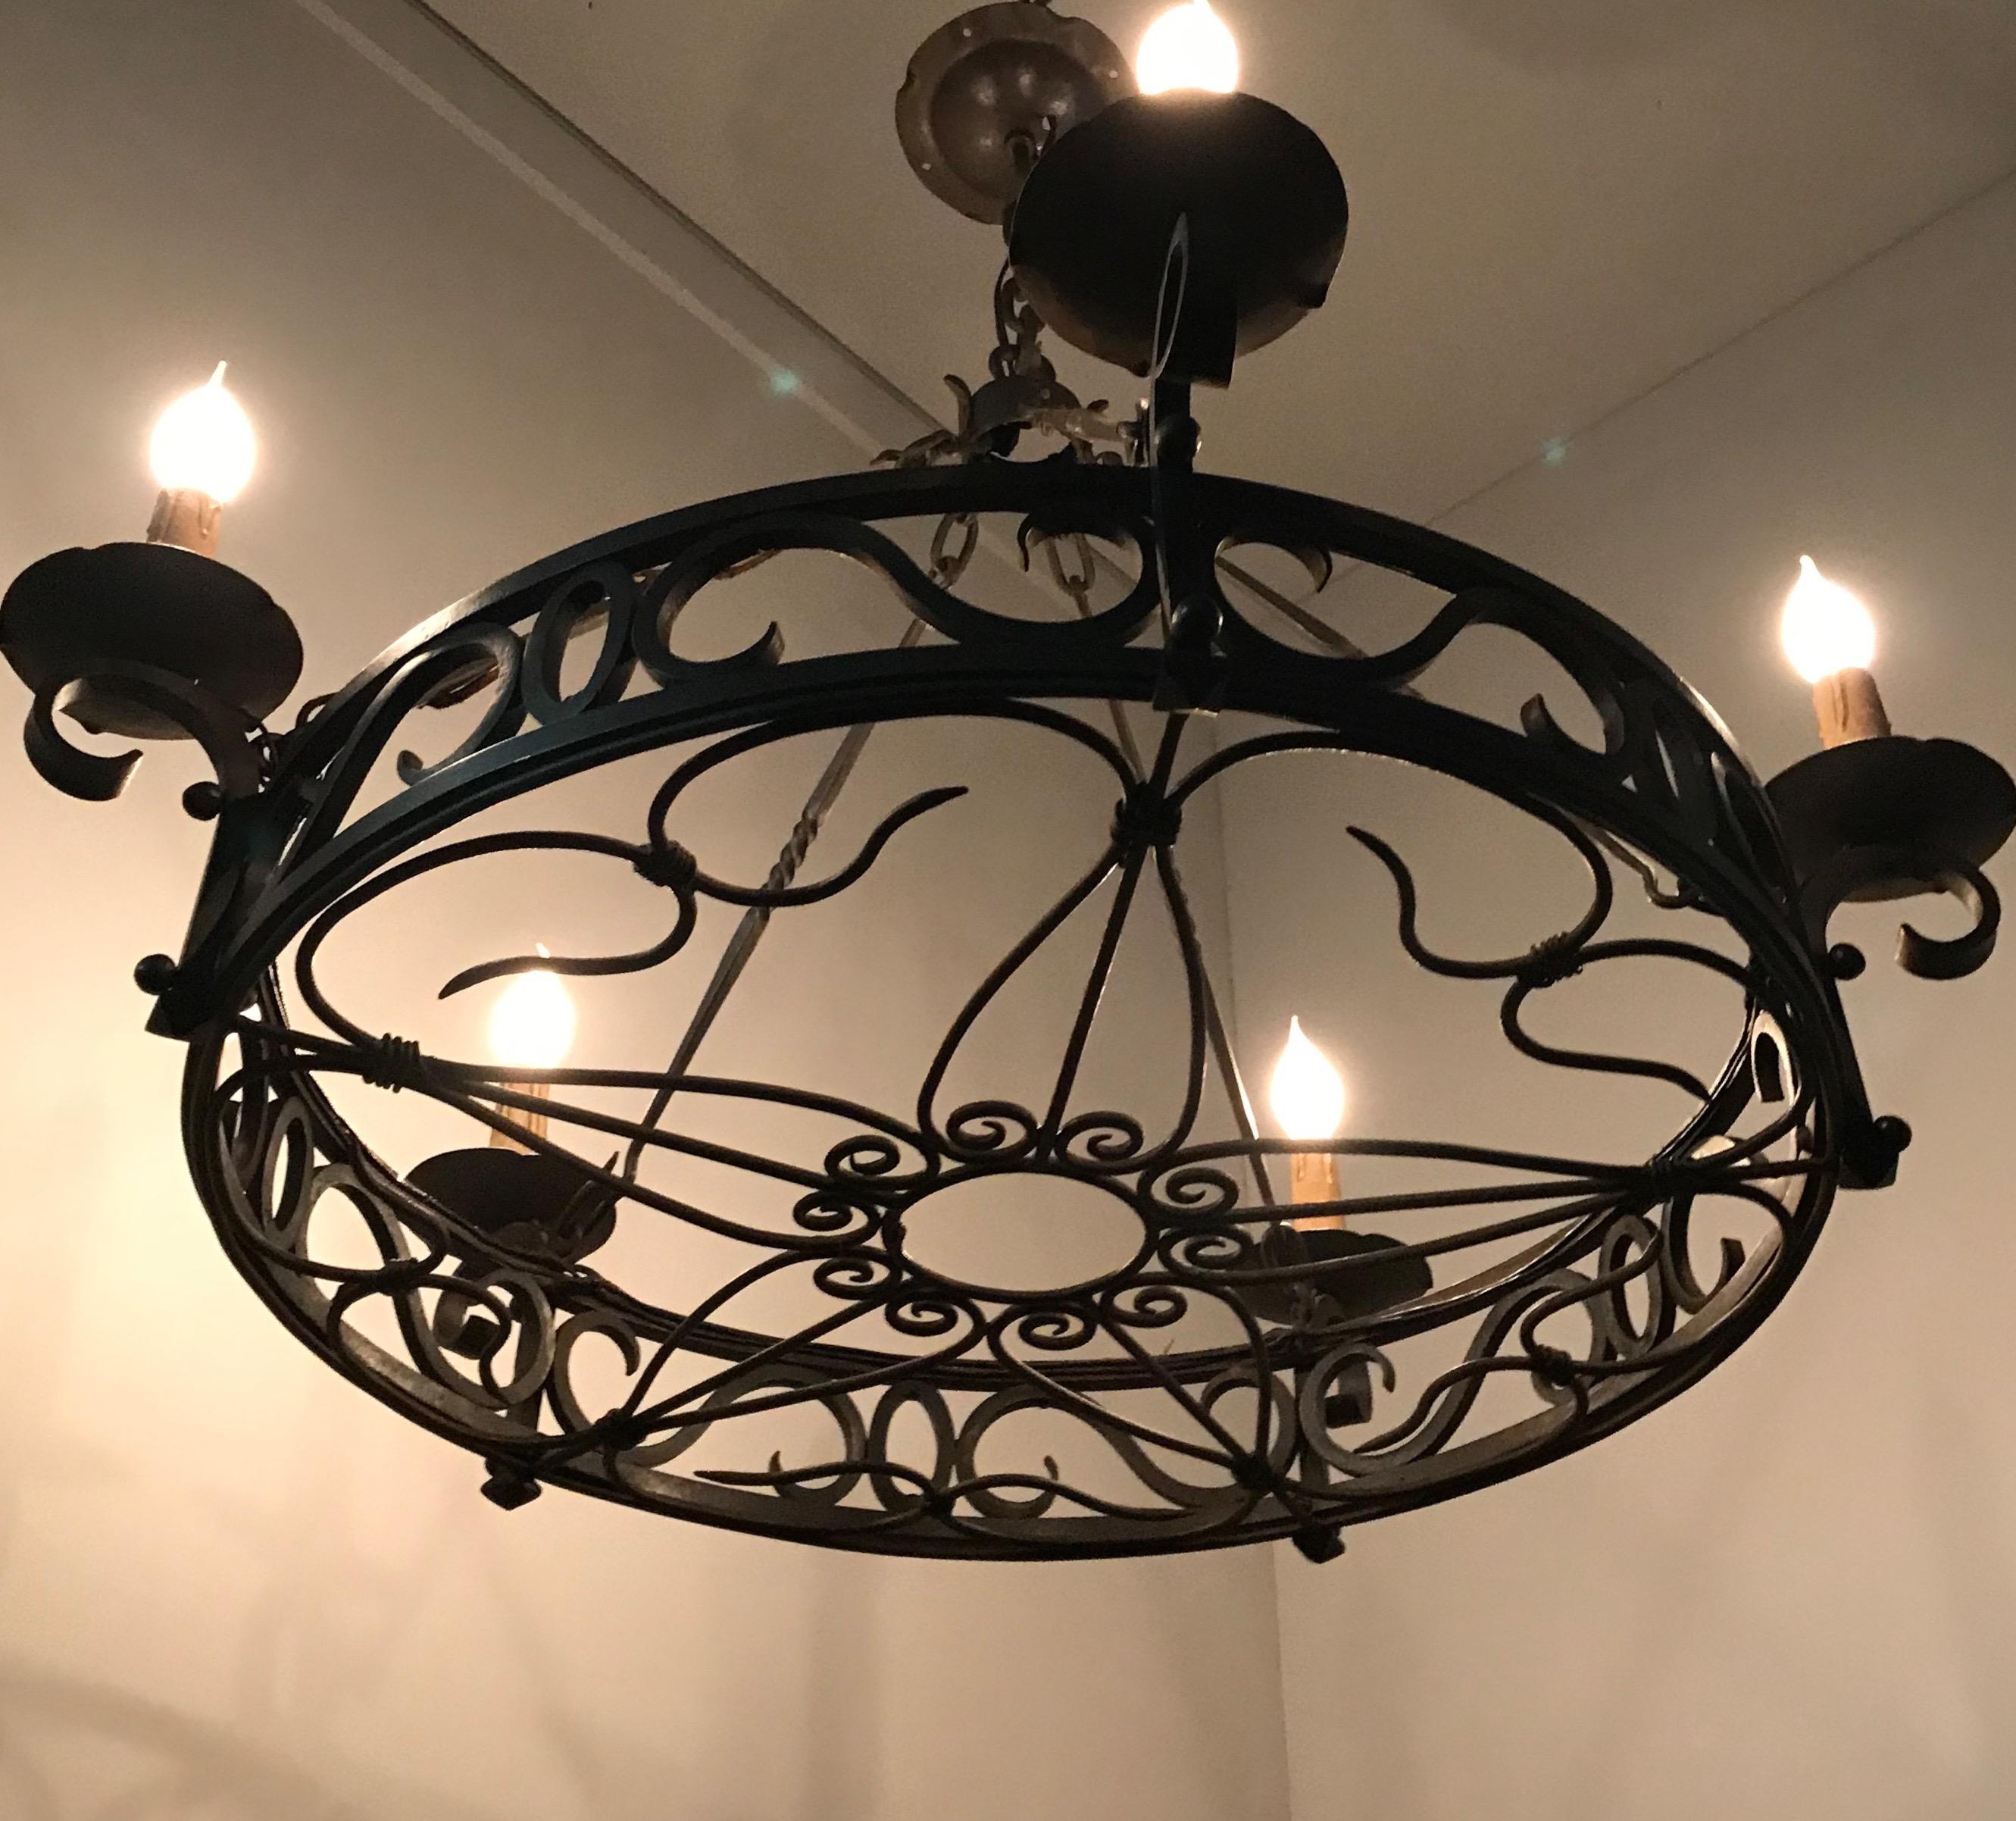 Arts and Crafts Large Arts & Crafts Wrought Iron Chandelier for Dining Room or Restaurant Etc.